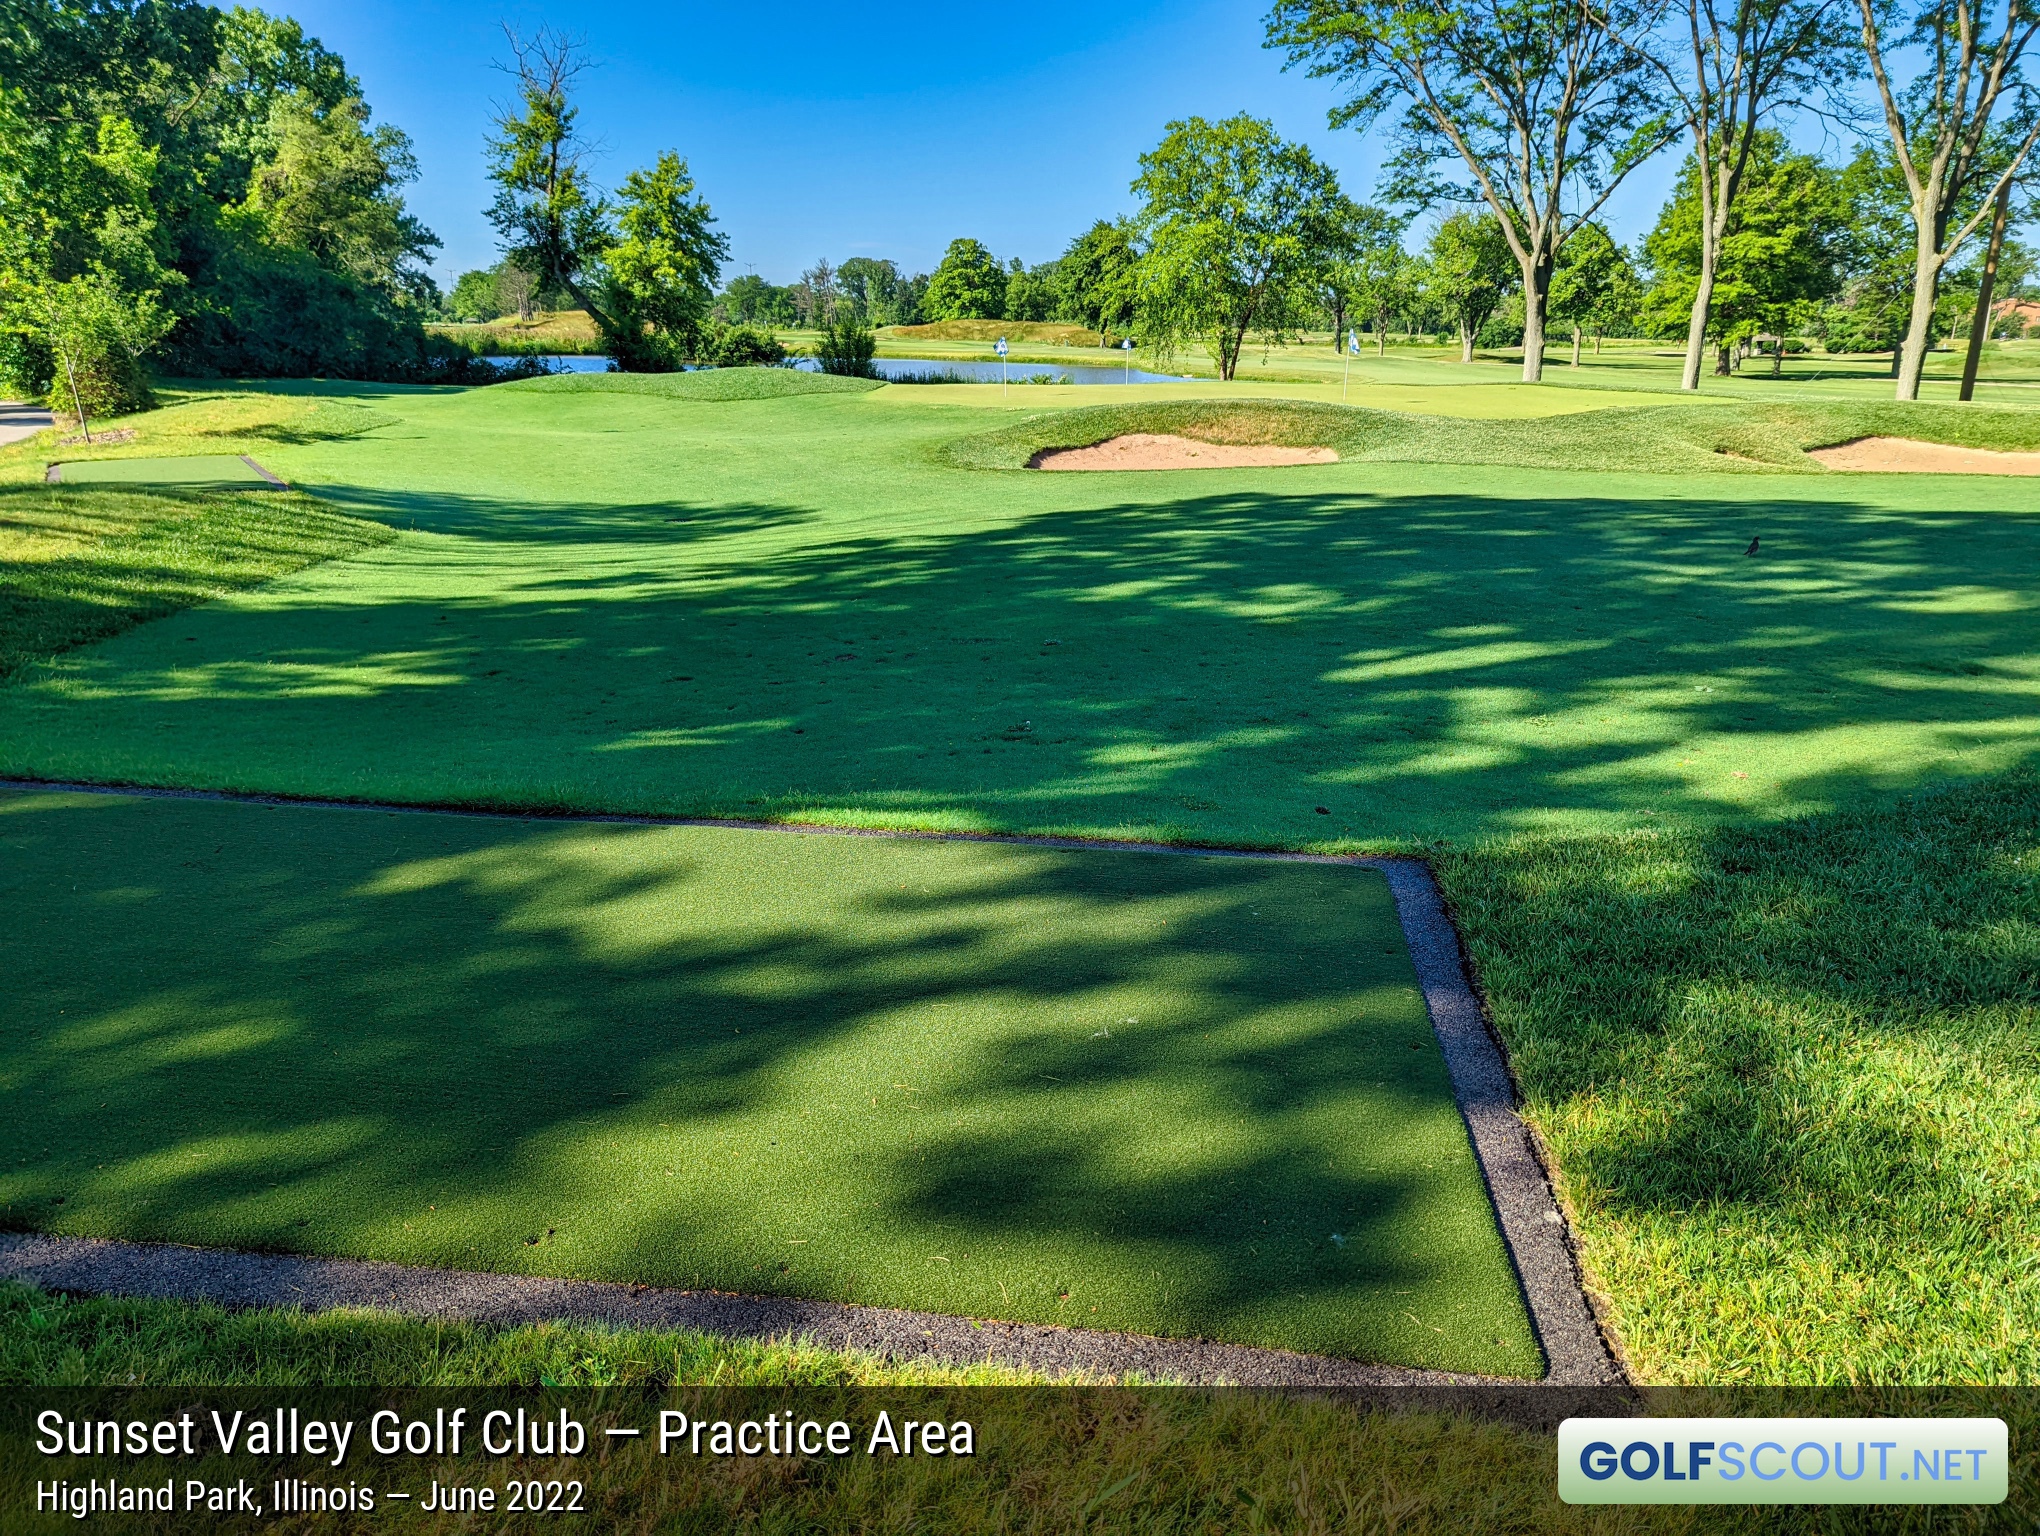 Photo of the practice area at Sunset Valley Golf Club in Highland Park, Illinois. 